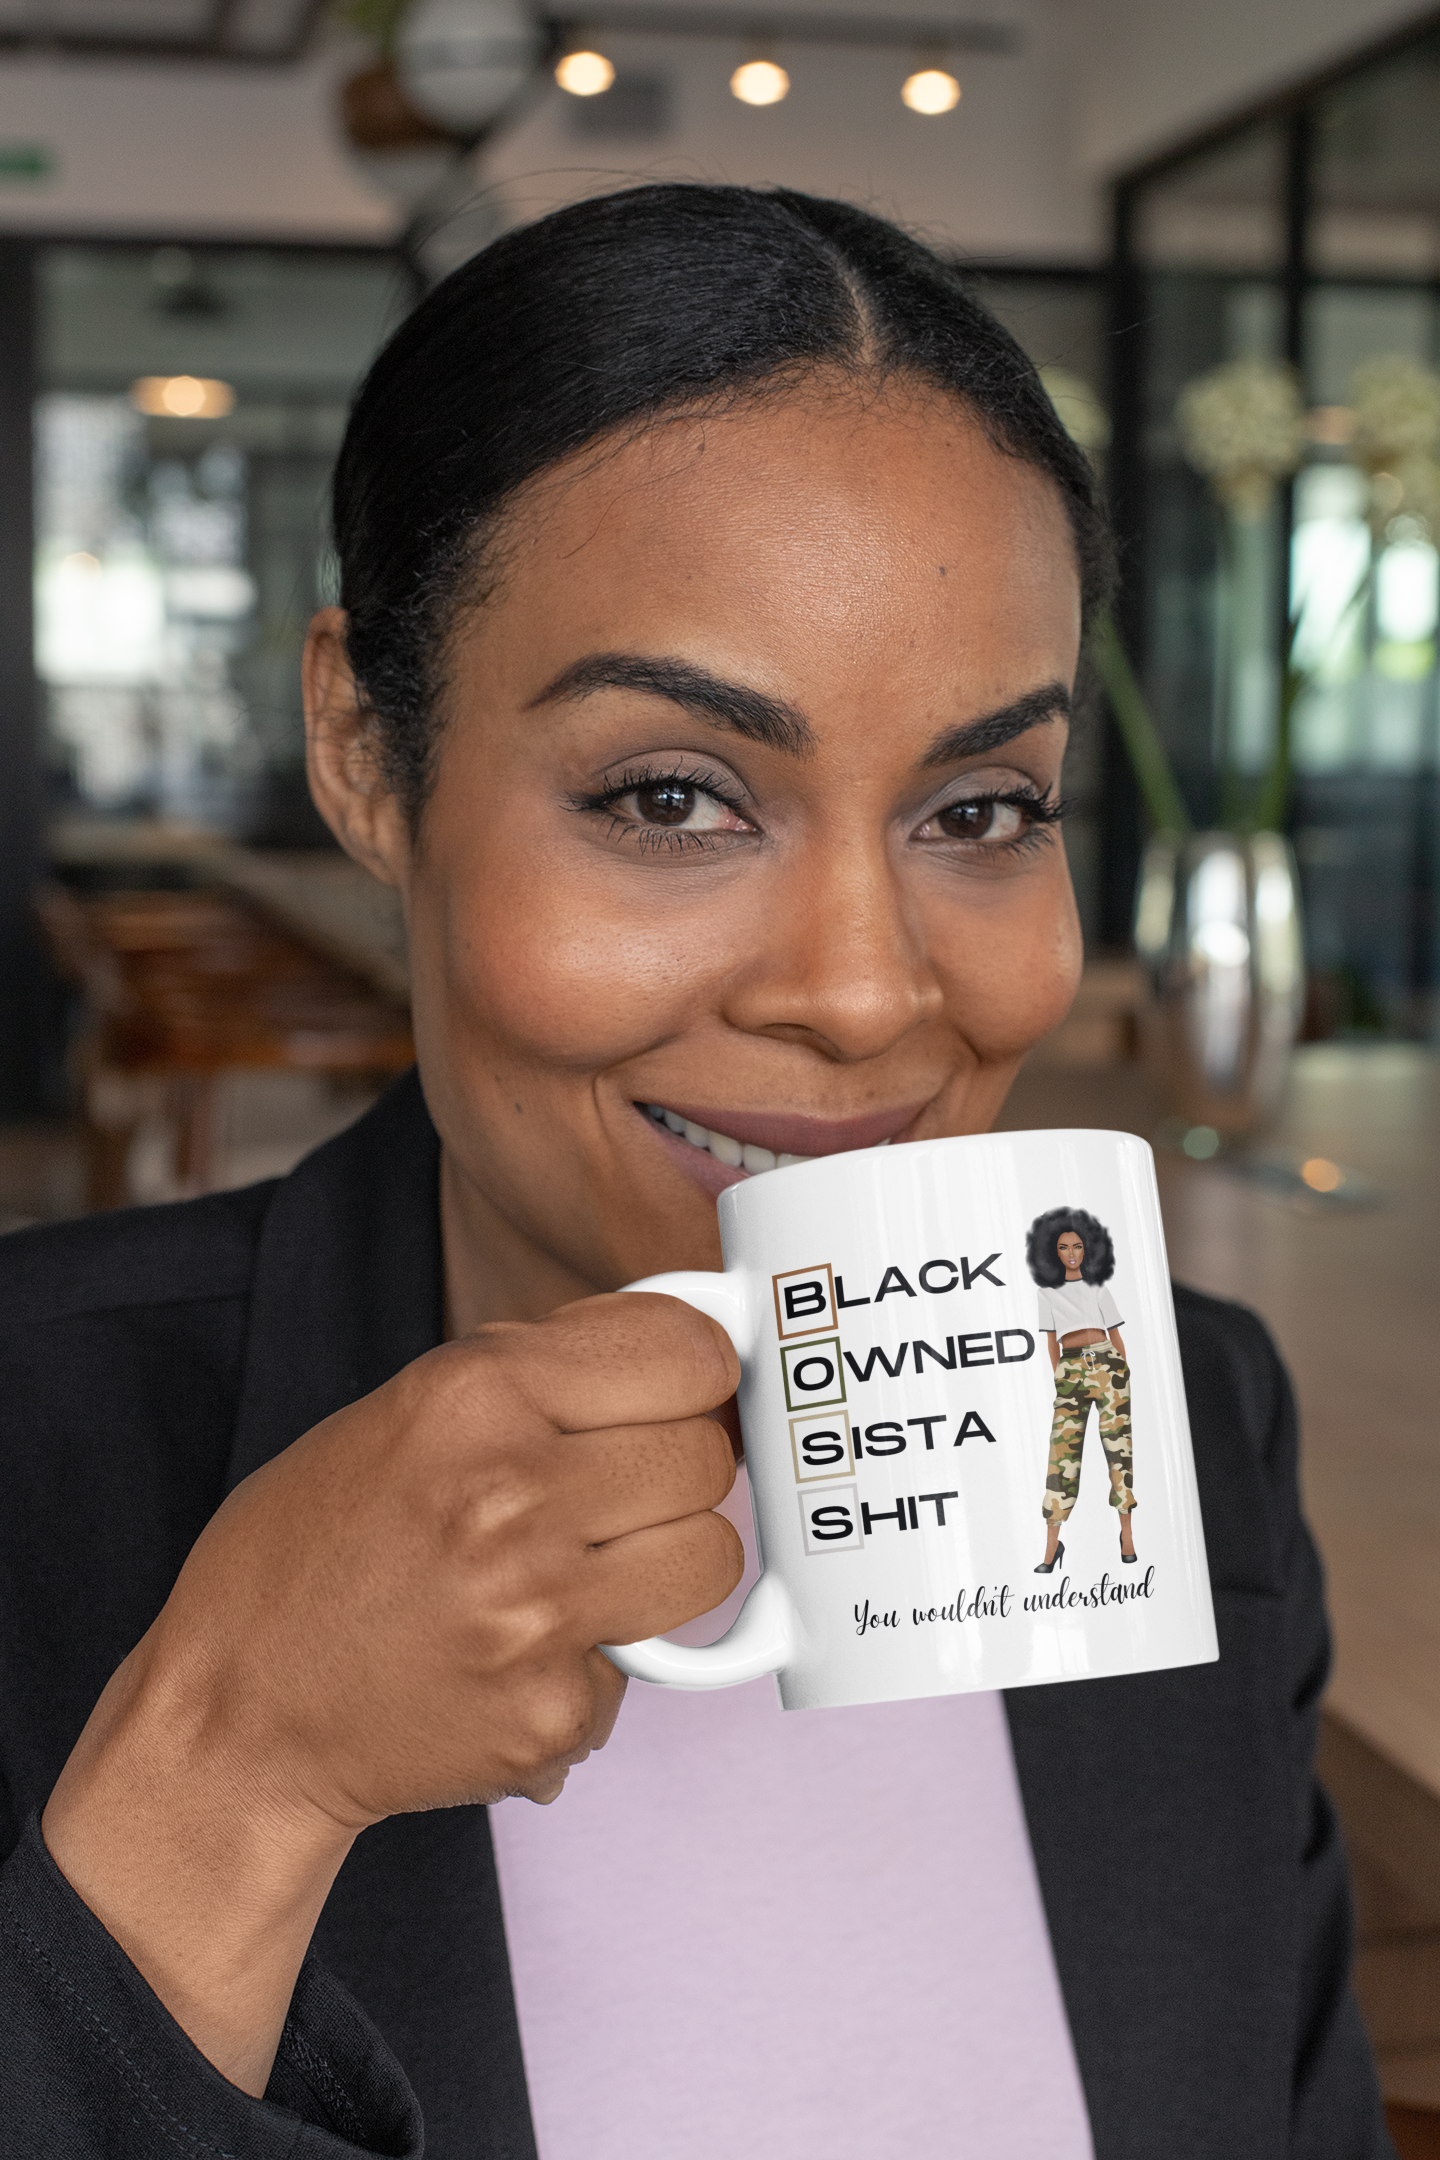 Black Owned Sista Shit, You Wouldn’t Understand Magic Mug